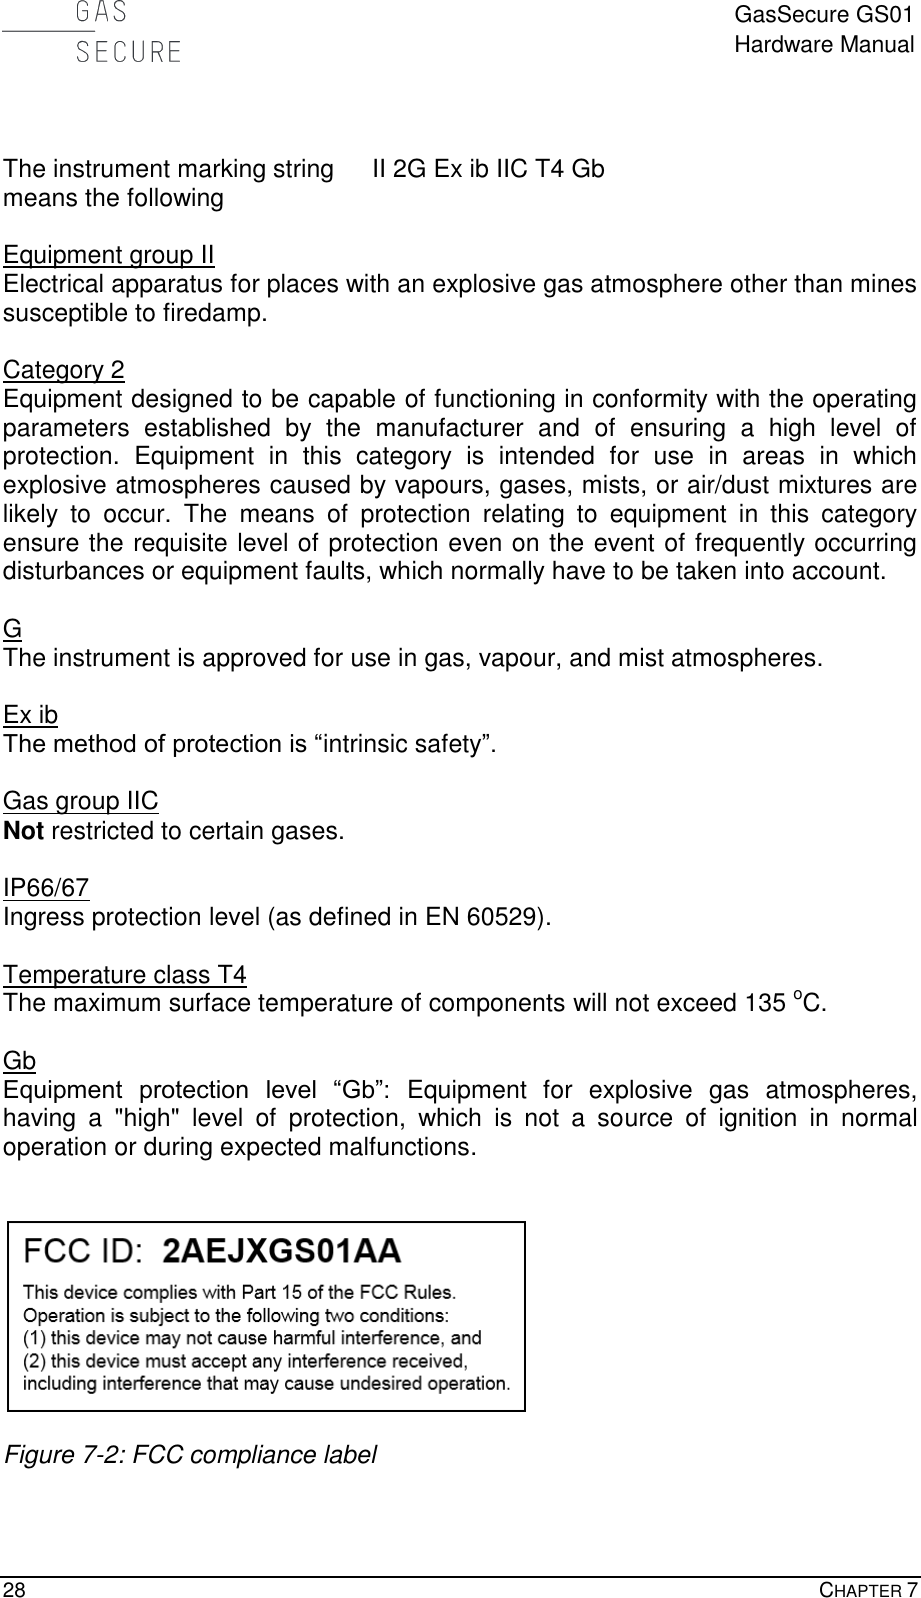  GasSecure GS01 Hardware Manual  28    CHAPTER 7     The instrument marking string  II 2G Ex ib IIC T4 Gb means the following  Equipment group II Electrical apparatus for places with an explosive gas atmosphere other than mines susceptible to firedamp.  Category 2 Equipment designed to be capable of functioning in conformity with the operating parameters  established  by  the  manufacturer  and  of  ensuring  a  high  level  of protection.  Equipment  in  this  category  is  intended  for  use  in  areas  in  which explosive atmospheres caused by vapours, gases, mists, or air/dust mixtures are likely  to  occur.  The  means  of  protection  relating  to  equipment  in  this  category ensure the requisite level of protection even on the event of frequently occurring disturbances or equipment faults, which normally have to be taken into account.   G The instrument is approved for use in gas, vapour, and mist atmospheres.  Ex ib The method of protection is “intrinsic safety”.  Gas group IIC  Not restricted to certain gases.  IP66/67 Ingress protection level (as defined in EN 60529).  Temperature class T4 The maximum surface temperature of components will not exceed 135 oC.  Gb Equipment  protection  level  “Gb”:  Equipment  for  explosive  gas  atmospheres, having  a  &quot;high&quot;  level  of  protection,  which  is  not  a  source  of  ignition  in  normal operation or during expected malfunctions.     Figure 7-2: FCC compliance label 